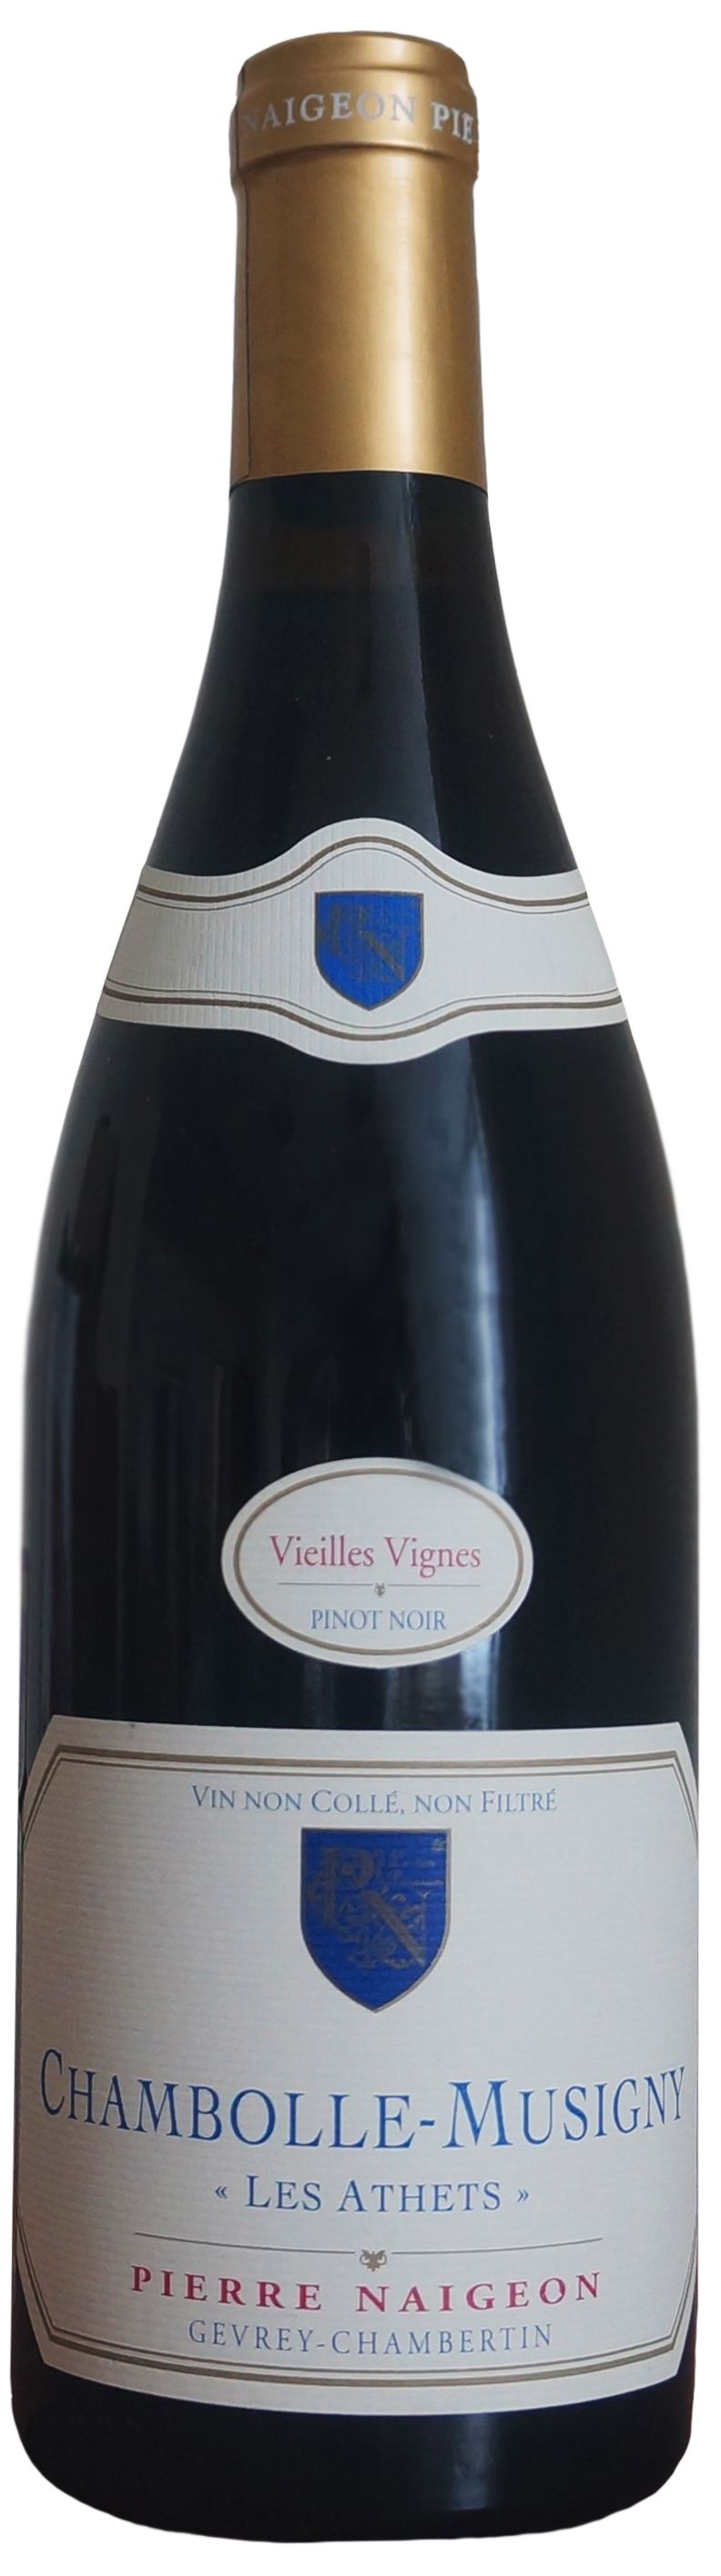 Pierre Naigeon, Chambolle-Musigny Les Athets Vieilles Vignes, 2008